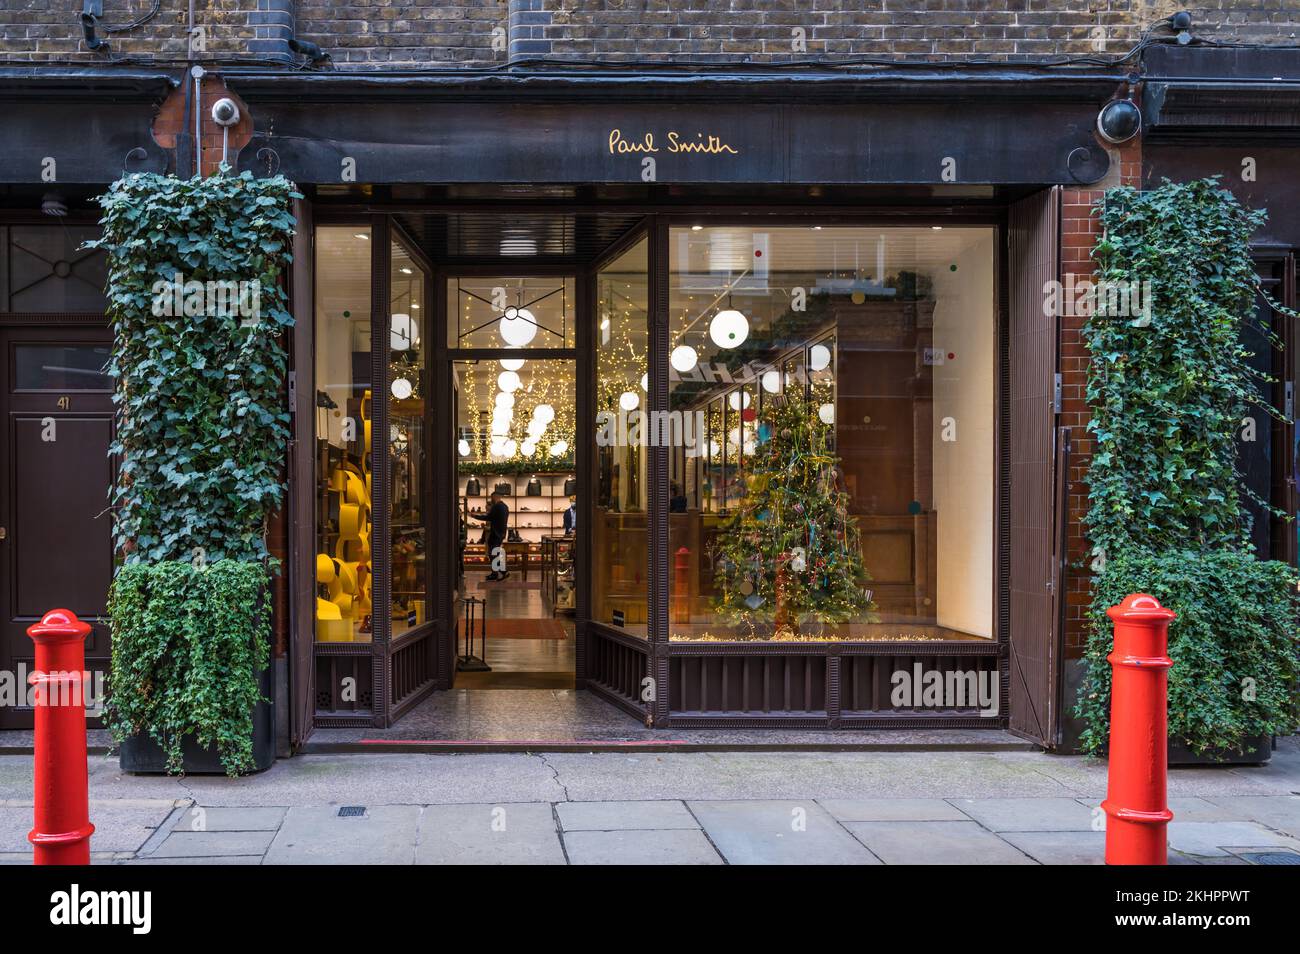 Paul Smith fashion shop with Christmas decorated interior and Christmas  tree in window. Floral Street, Covent Garden, London, England, UK Stock  Photo - Alamy